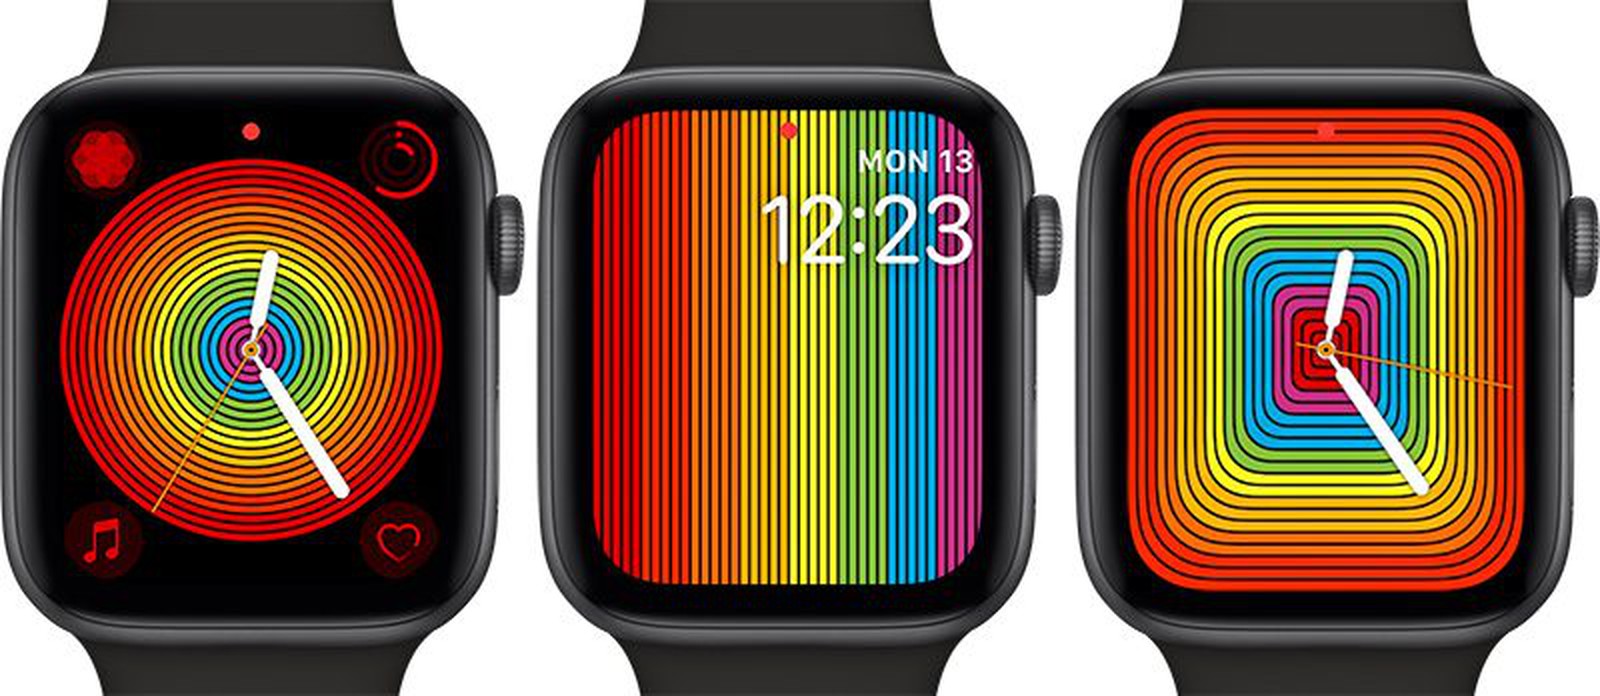 New Pride Watch Faces Available in watchOS 5.2.1 MacRumors